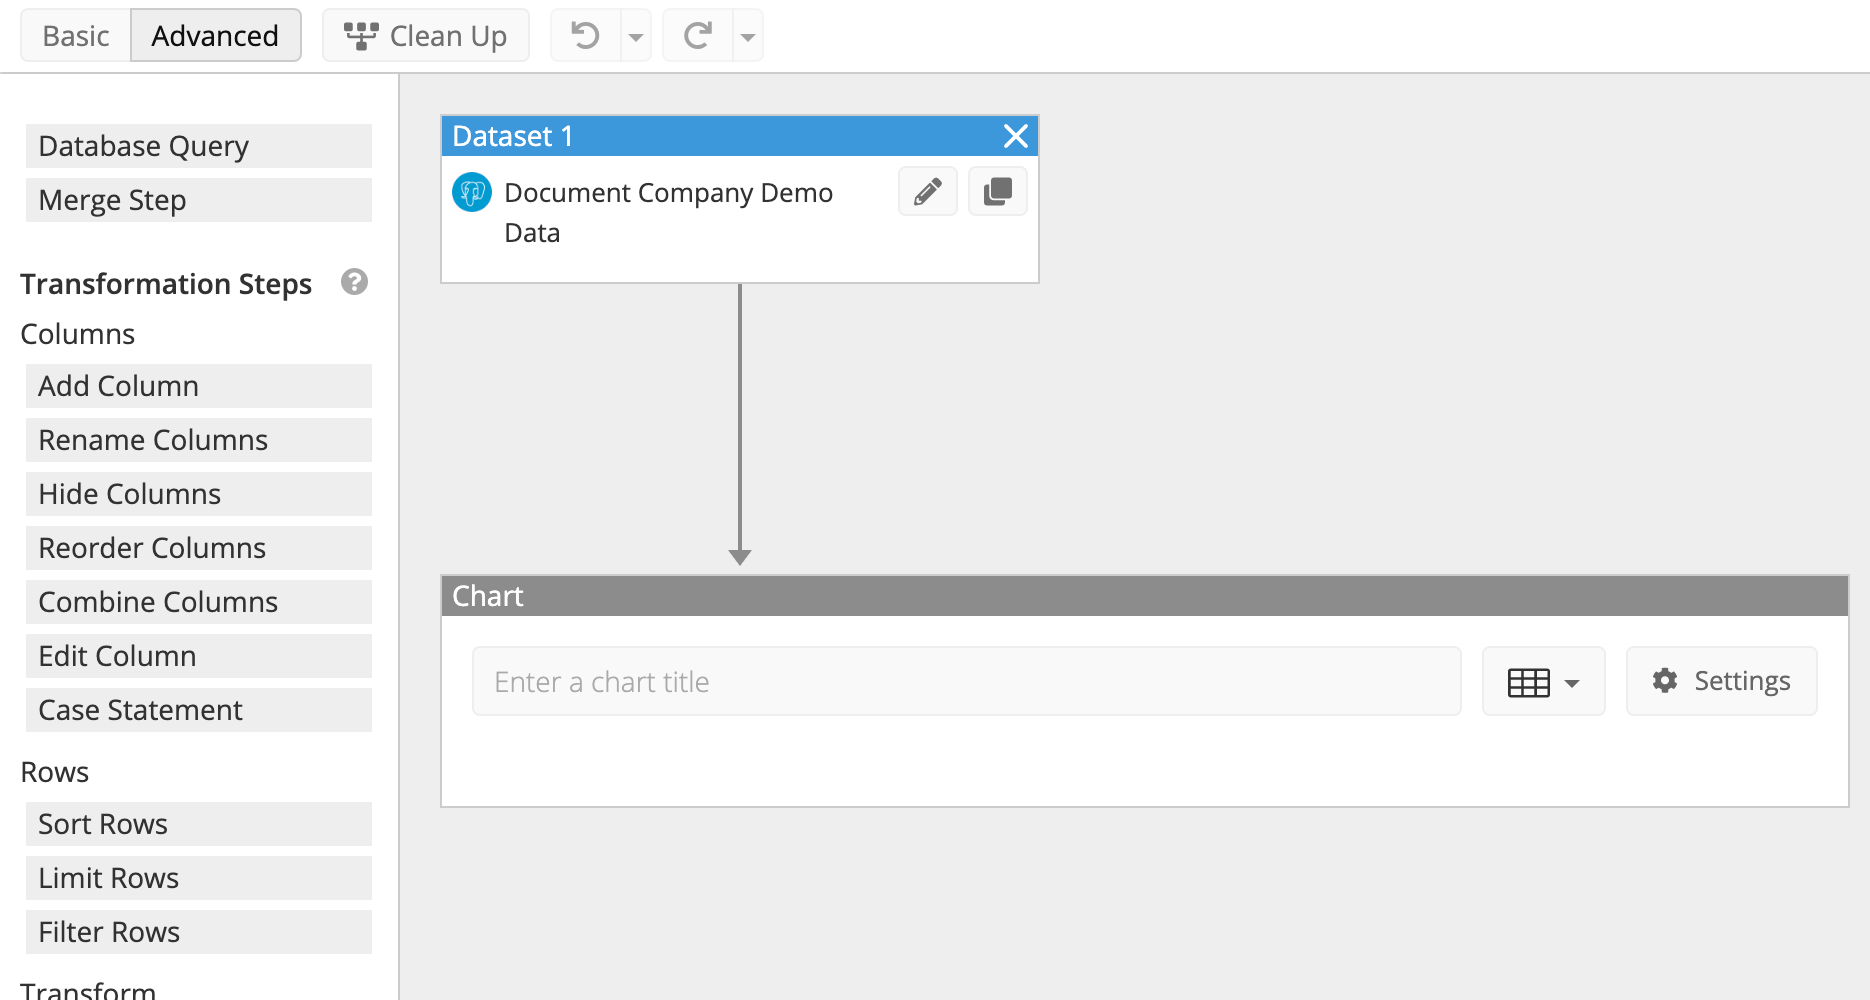 New canvas in Advanced Mode has empty Database Query node and a Chart node